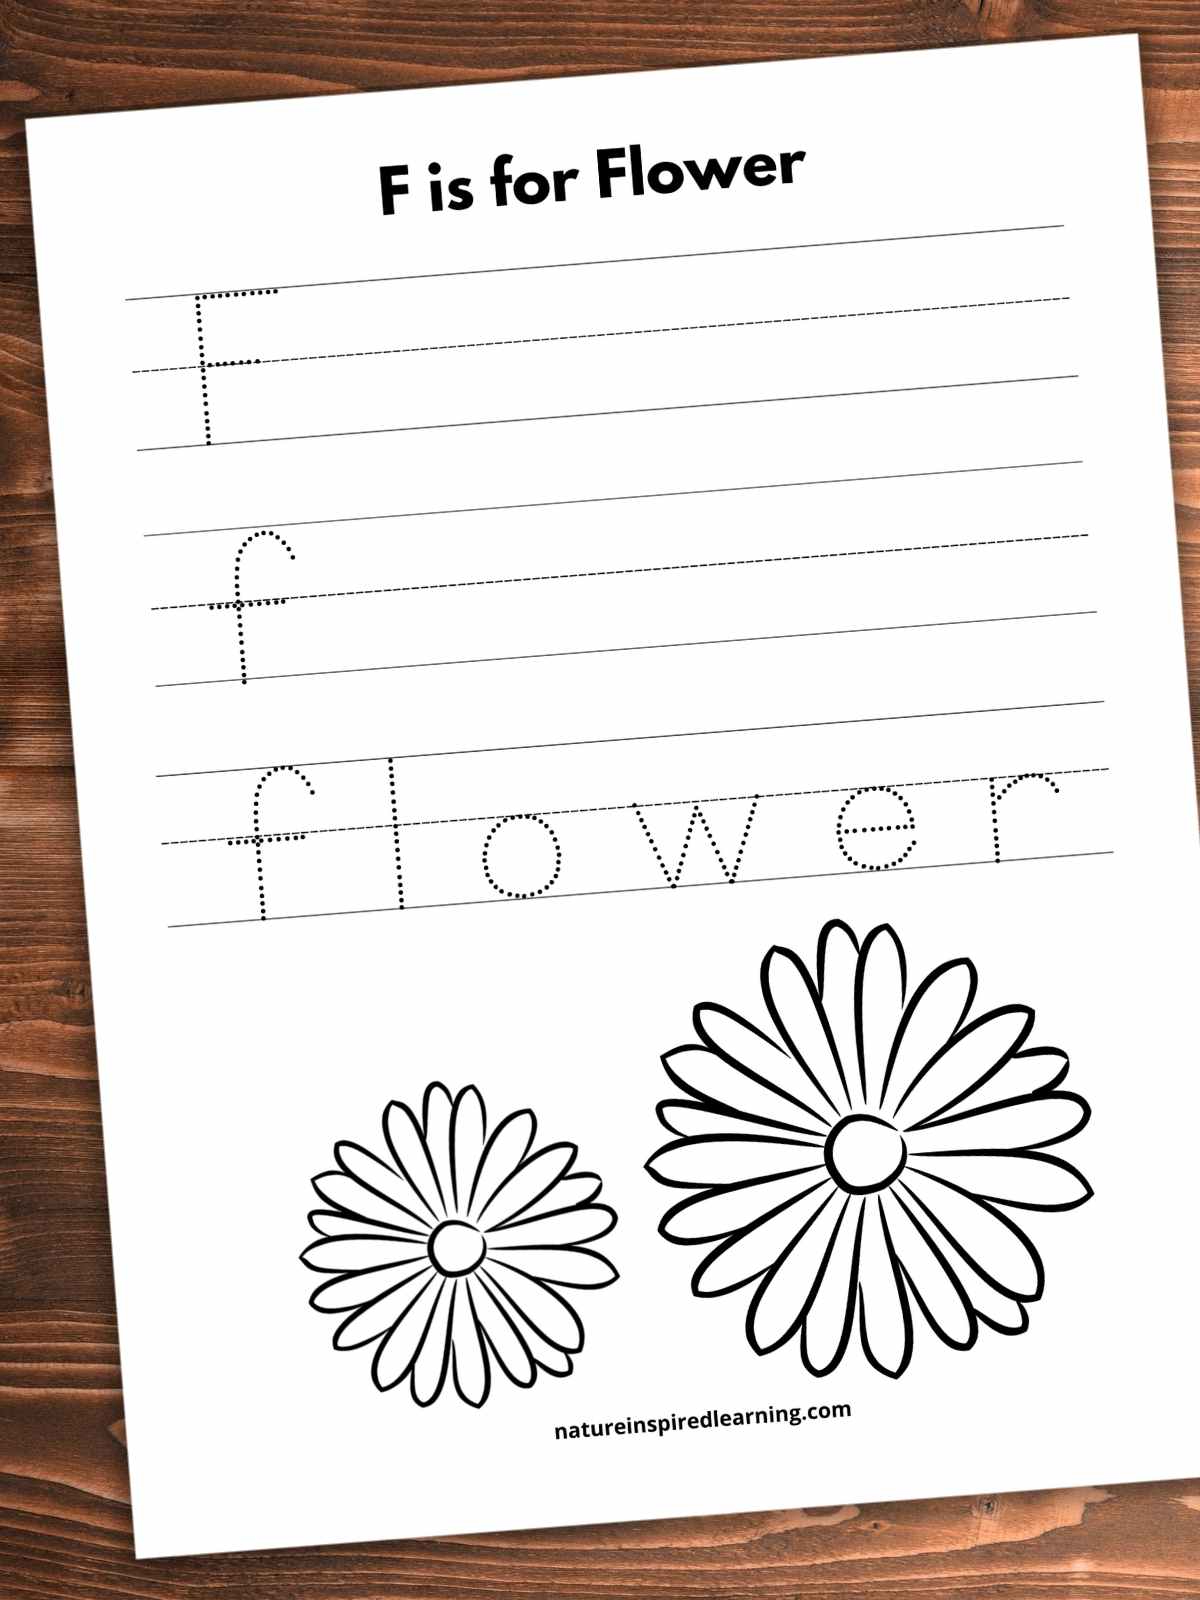 Worksheet on a wooden background. F is for Flower written across top with dashed F on a set of lines above dashed f on a set of lines. flower written in traceable font on a set of lines and two black and white flowers on the bottom half of the printable.